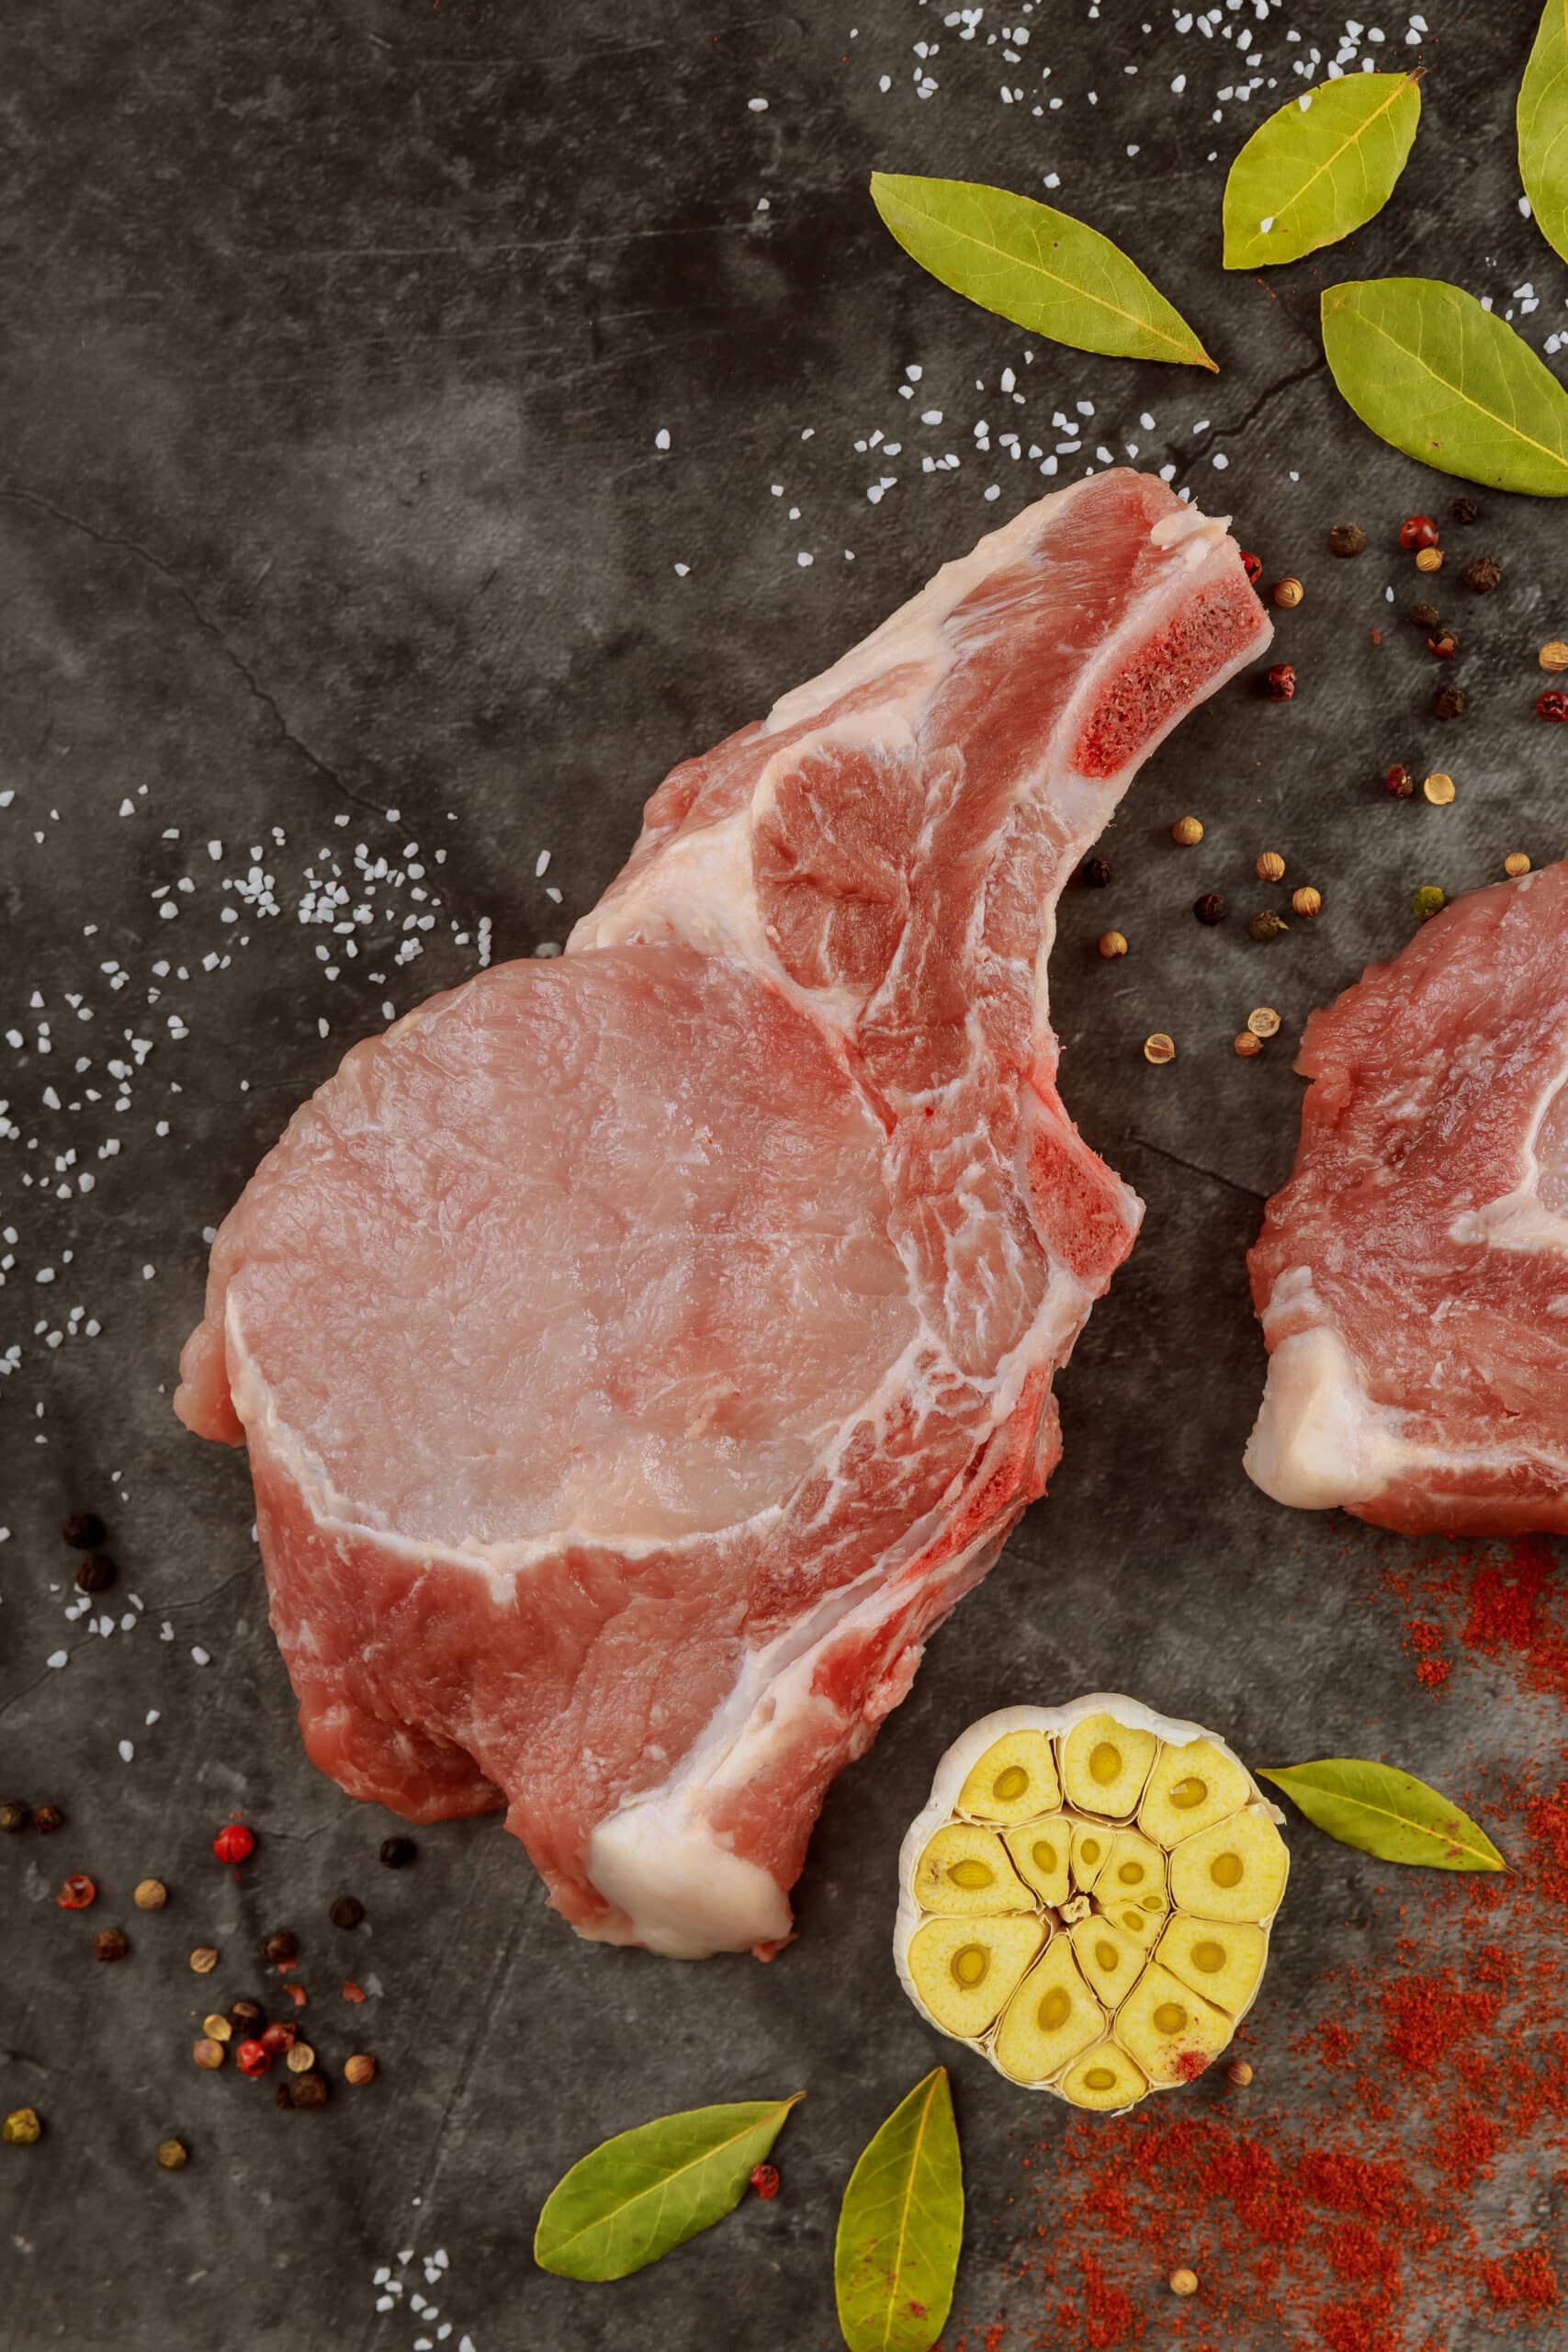 How To Cook Bone-in Pork Chops in The Oven